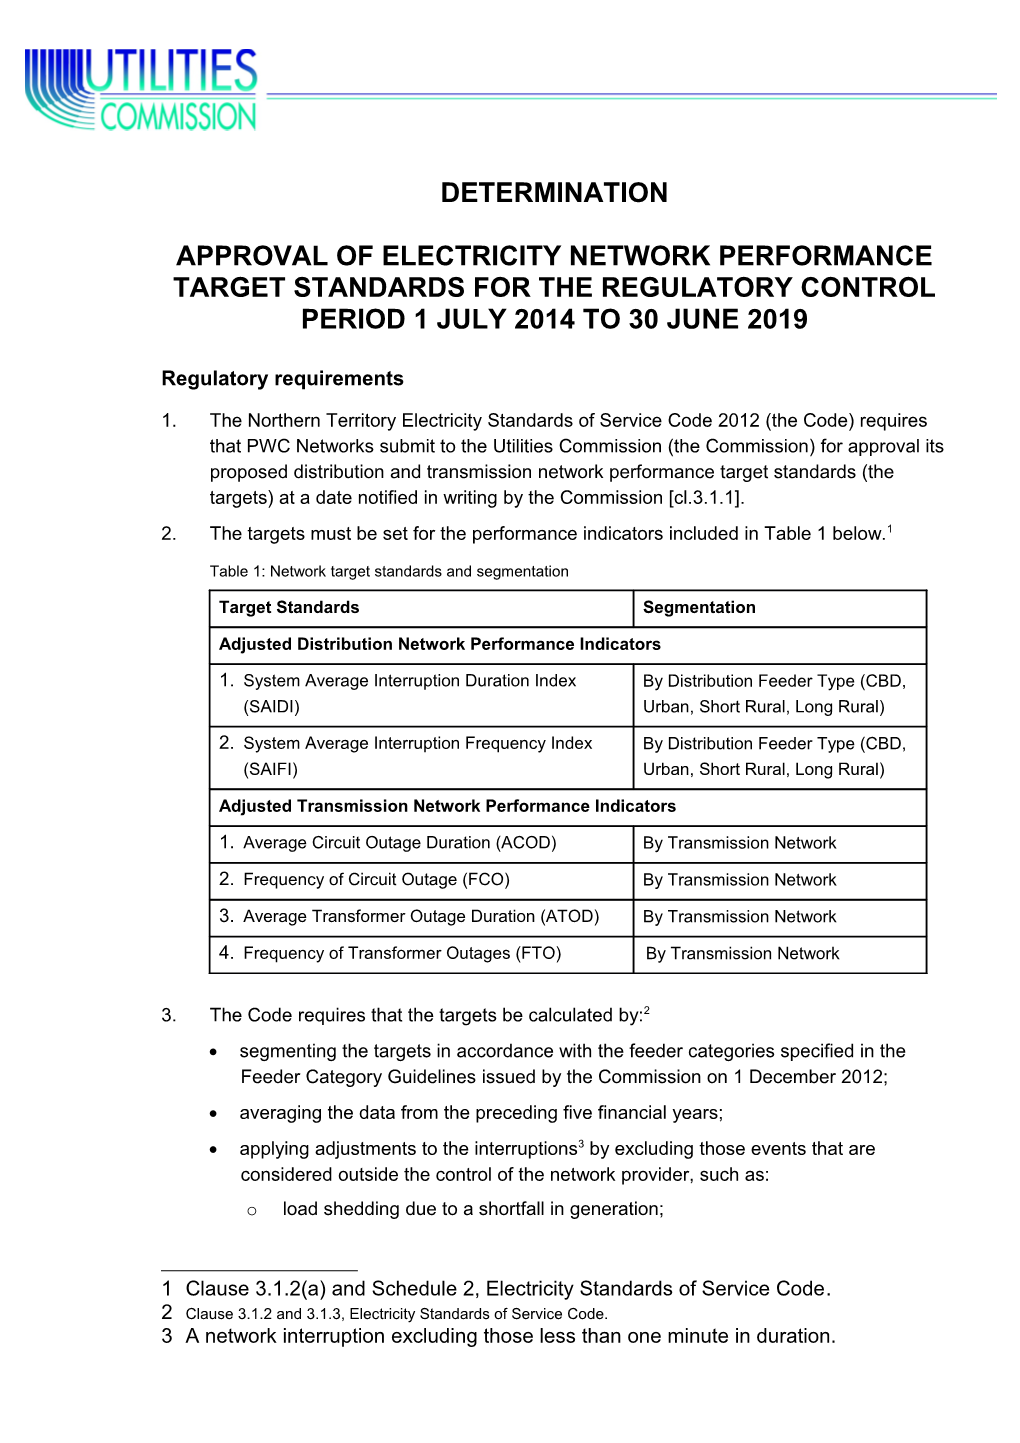 Approval of Electricity Network Performance Target Standards for the Regulatory Control